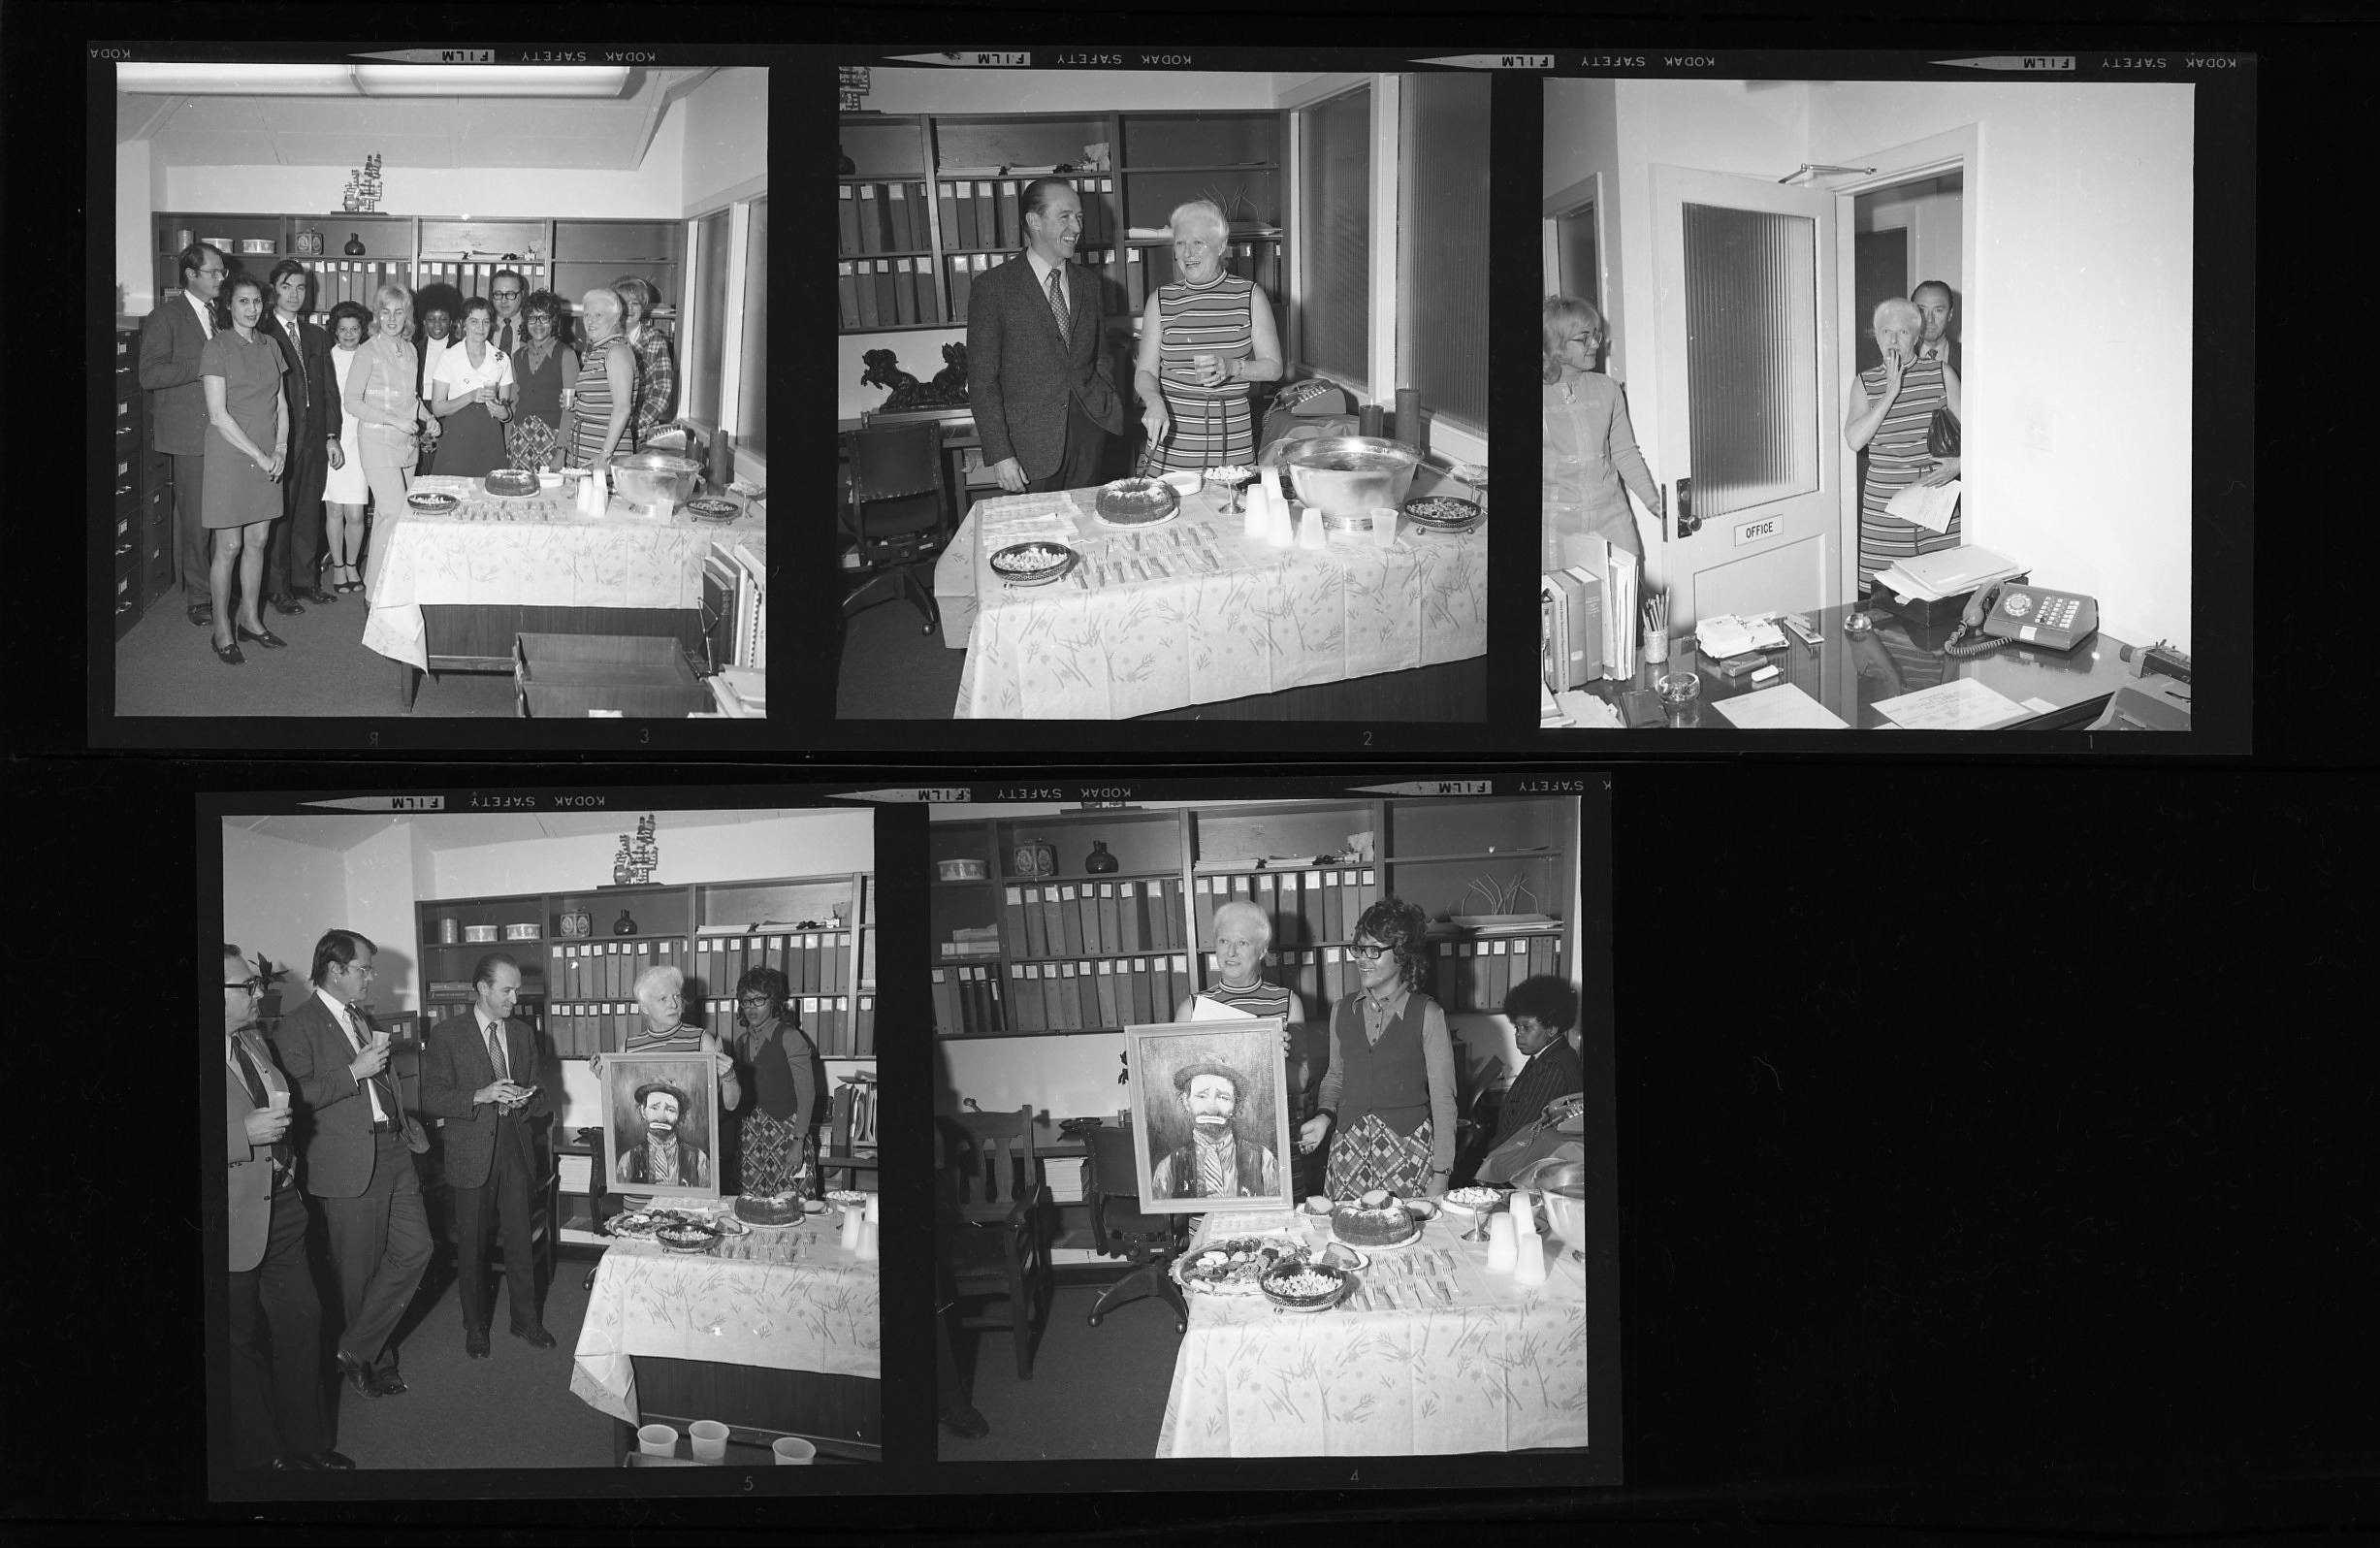 Five images in a contact sheet of a woman being surprised by a group waiting in a room. It appears t